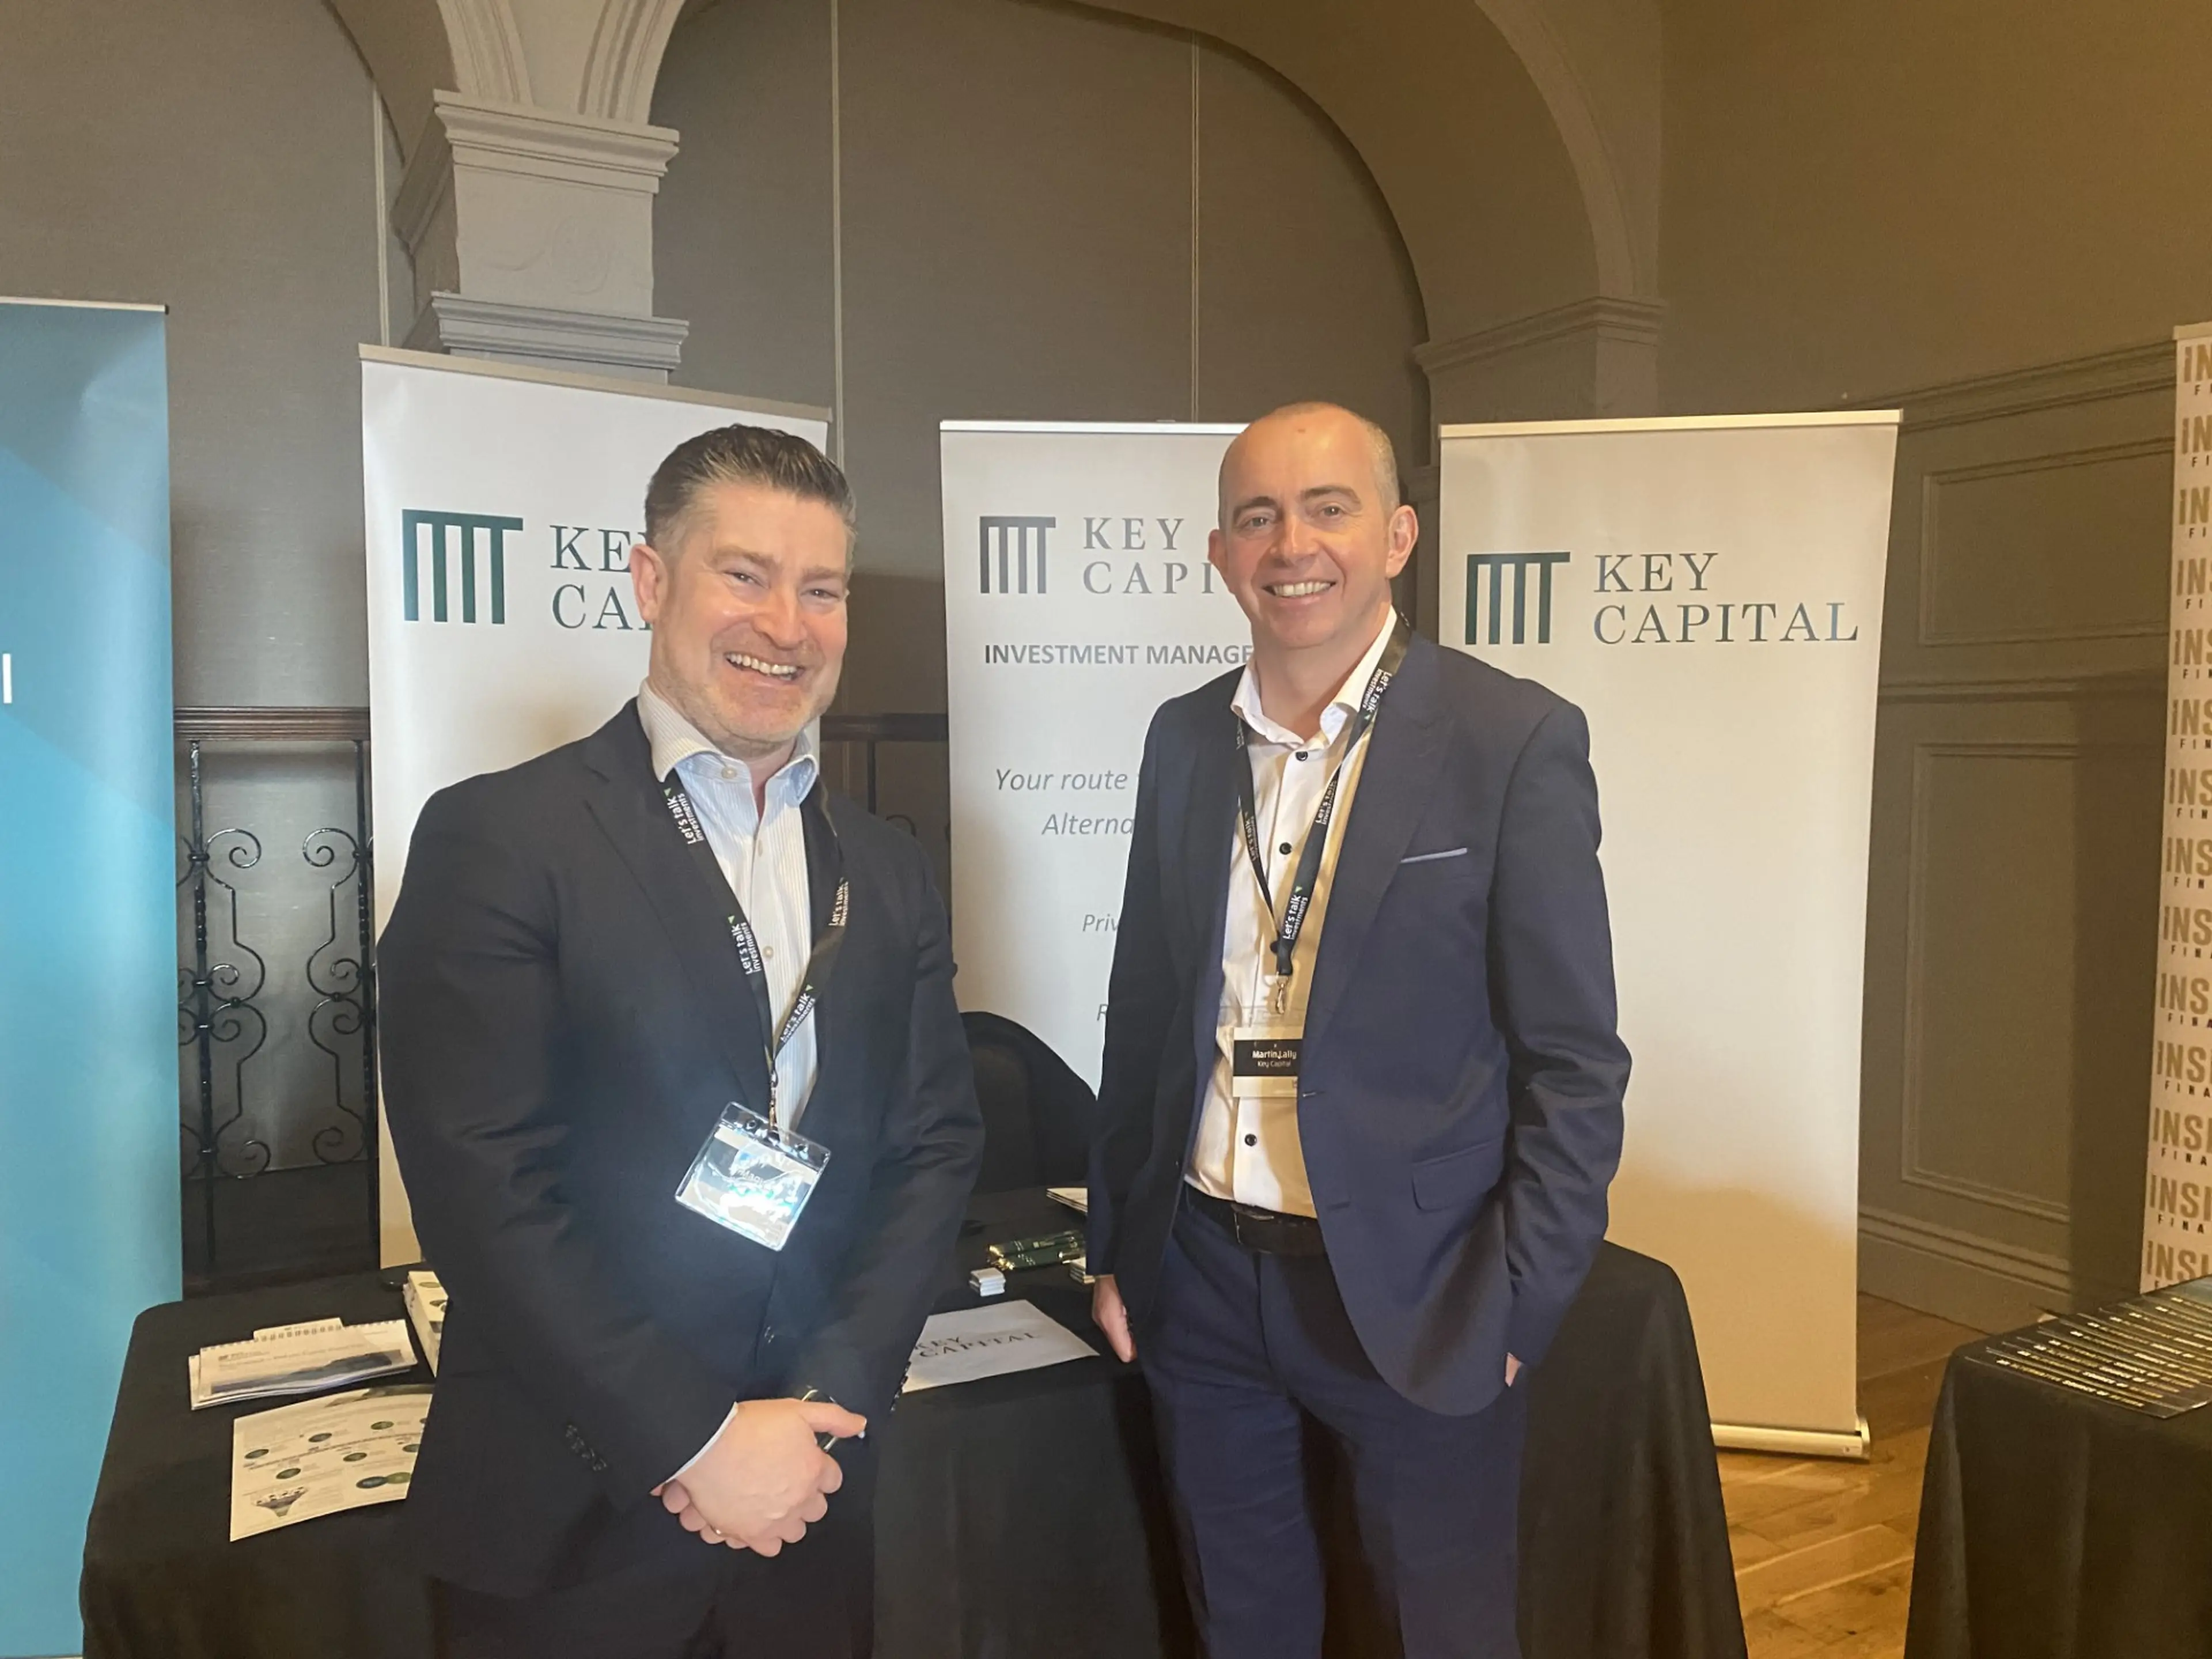 Martin Lally (on the right) and JP Maguire (on the left) from the Key Capital Investment Management team were at the 'Let’s Talk Investments 2024' conference.